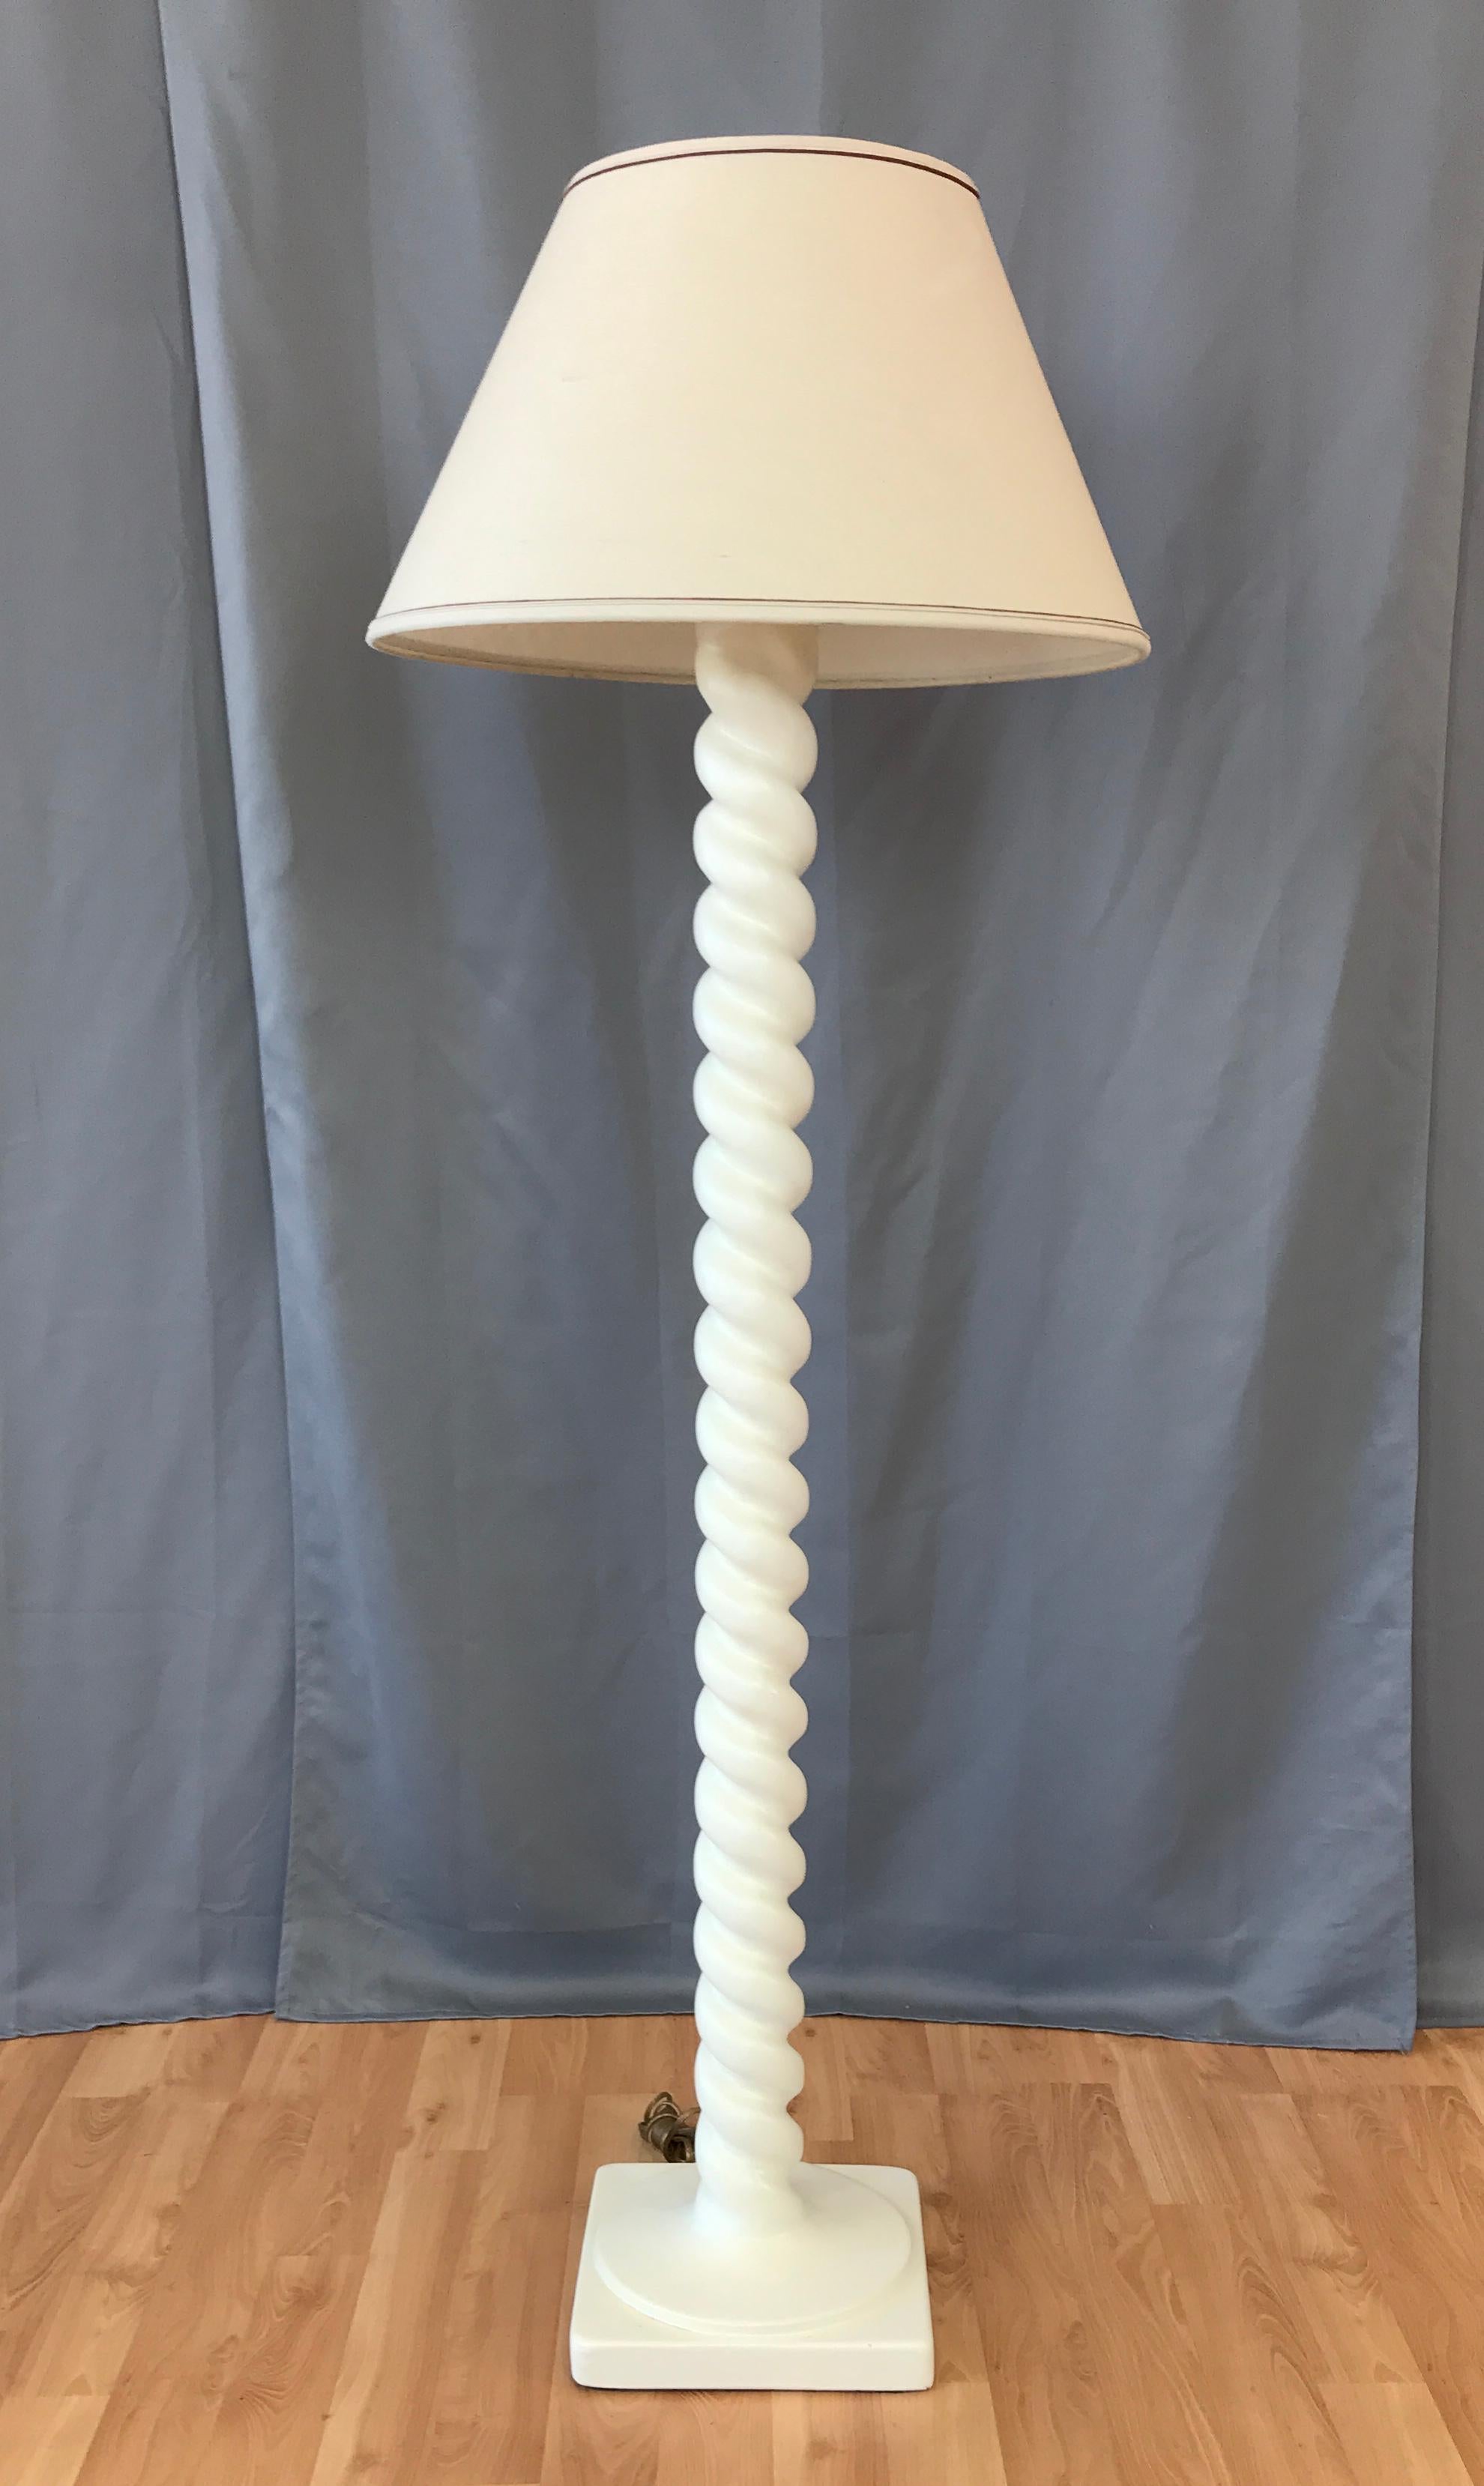 A classically chic tall spiral plaster floor lamp by Michael Taylor. 

Architectural and timeless, with sculptural corkscrew column that transition smoothly to perfectly proportioned base. 
Finished in satin eggshell lacquer. Has newer wiring.